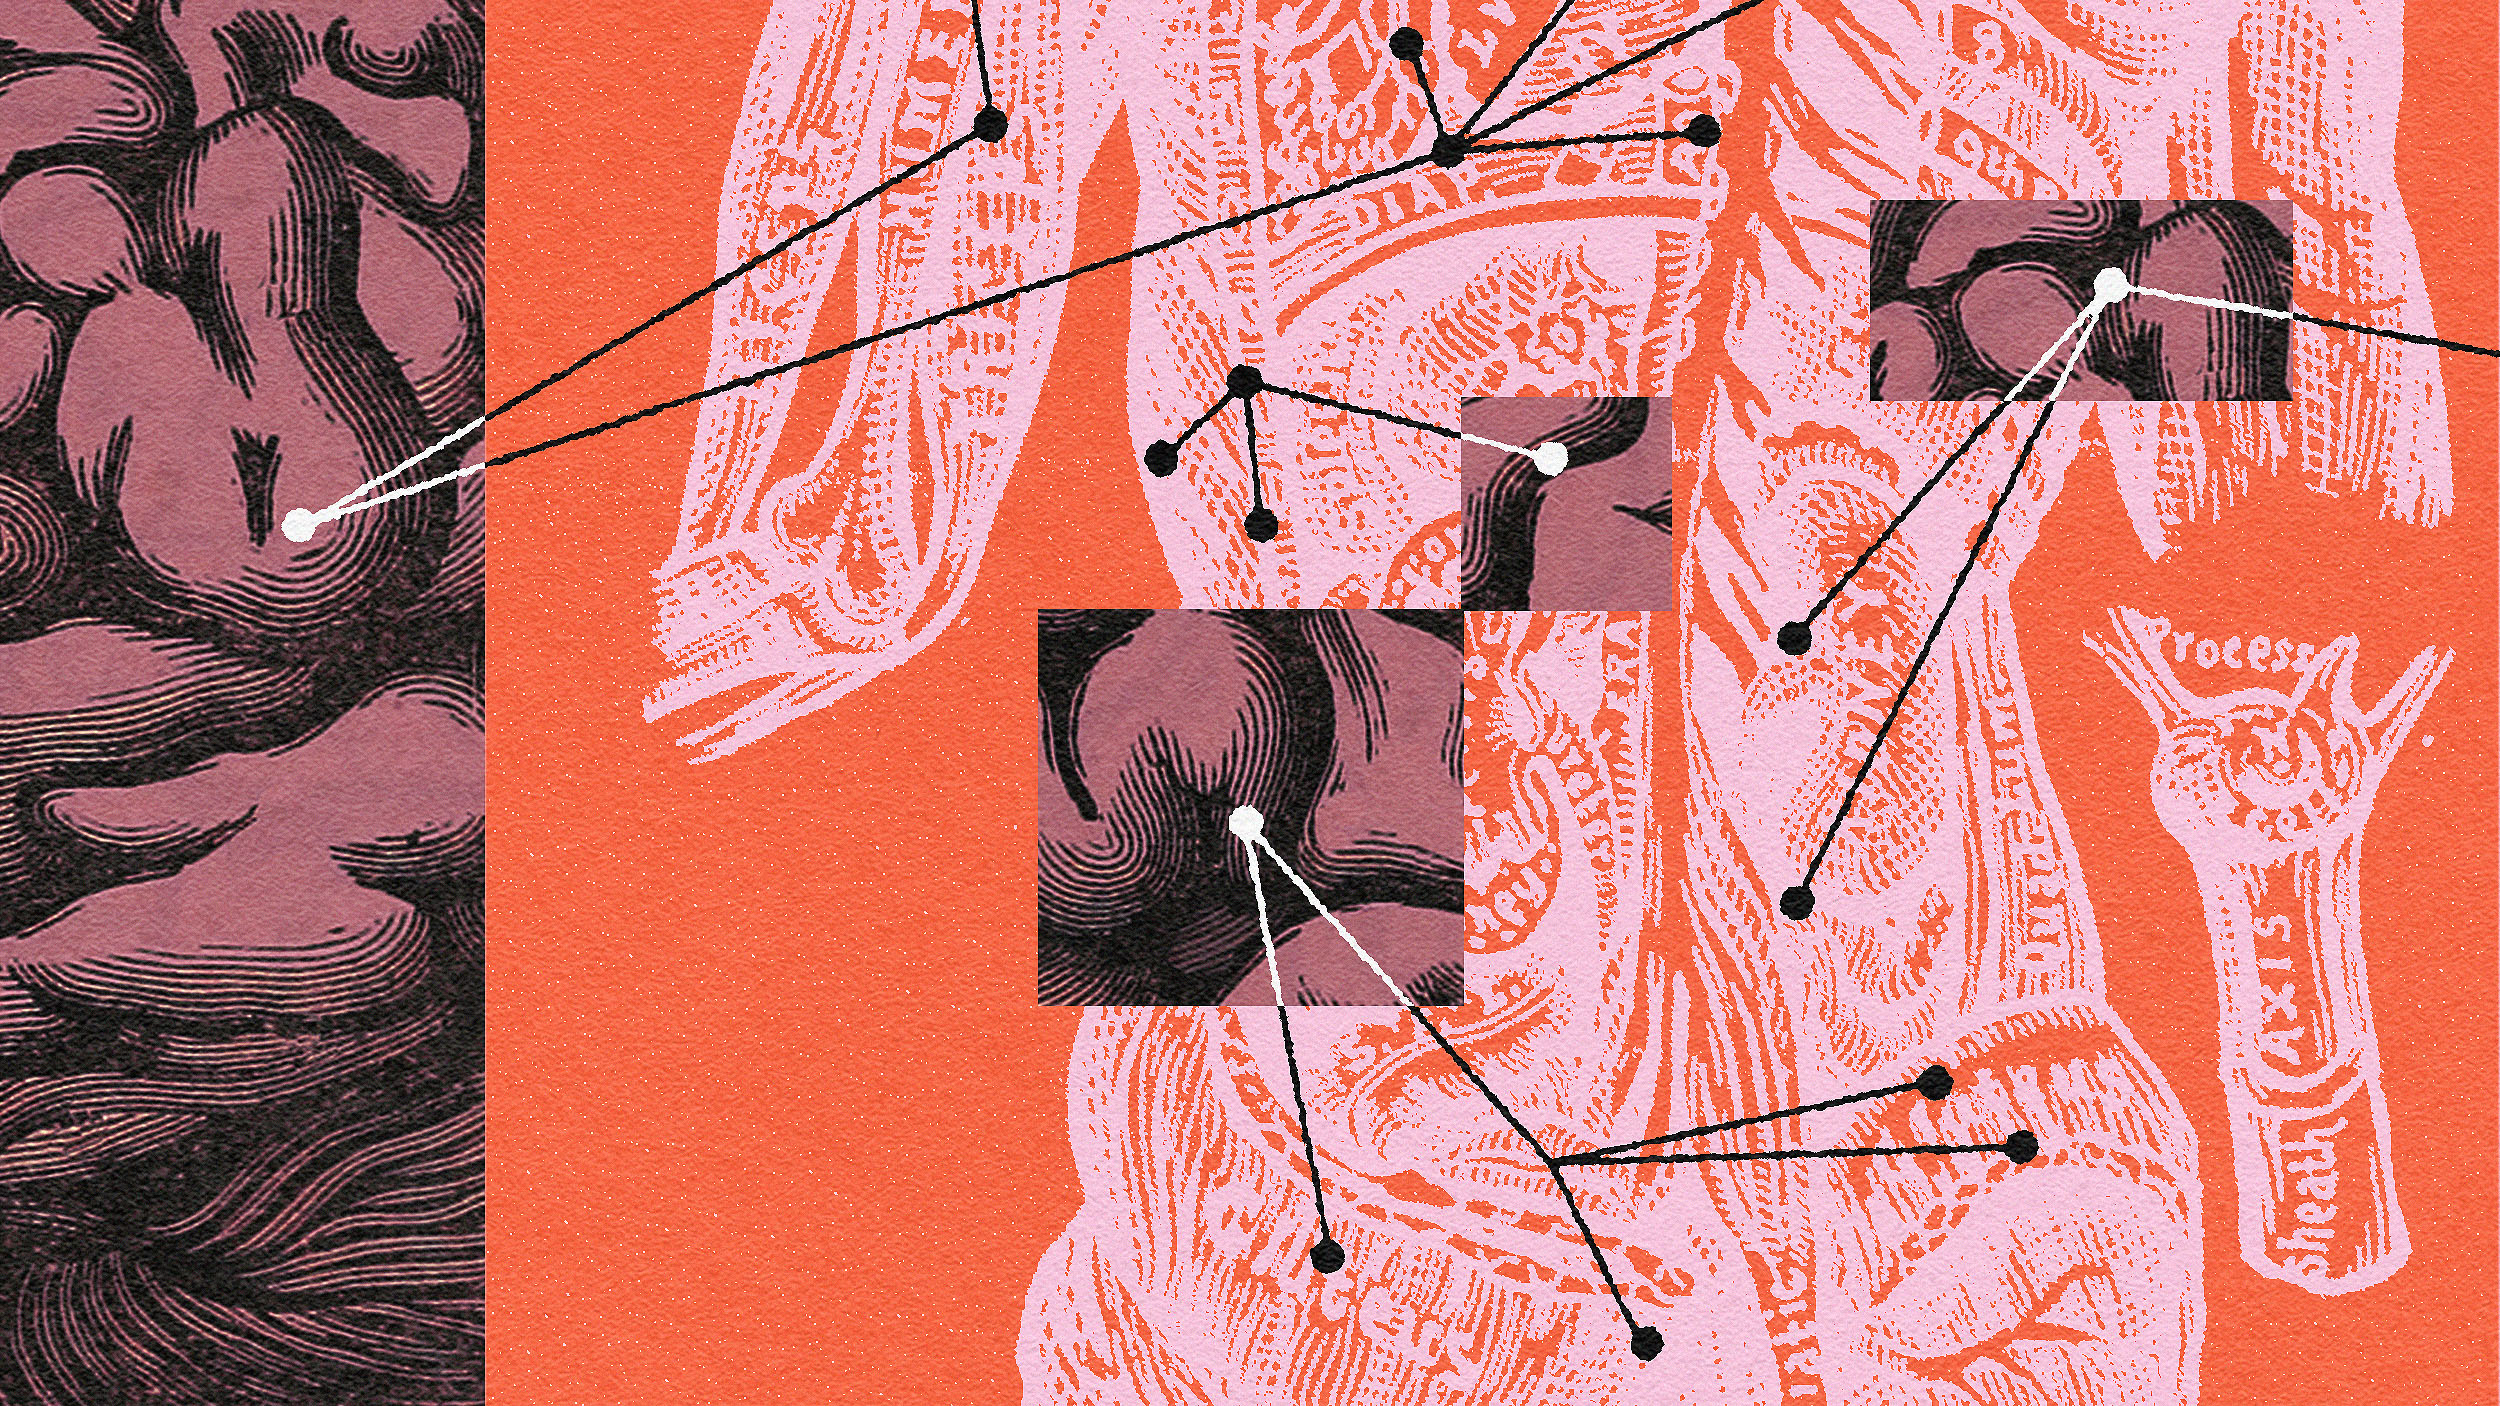 Abstract orange and pink collage with intricate line drawings of human figures and anatomical details, connected by white lines.